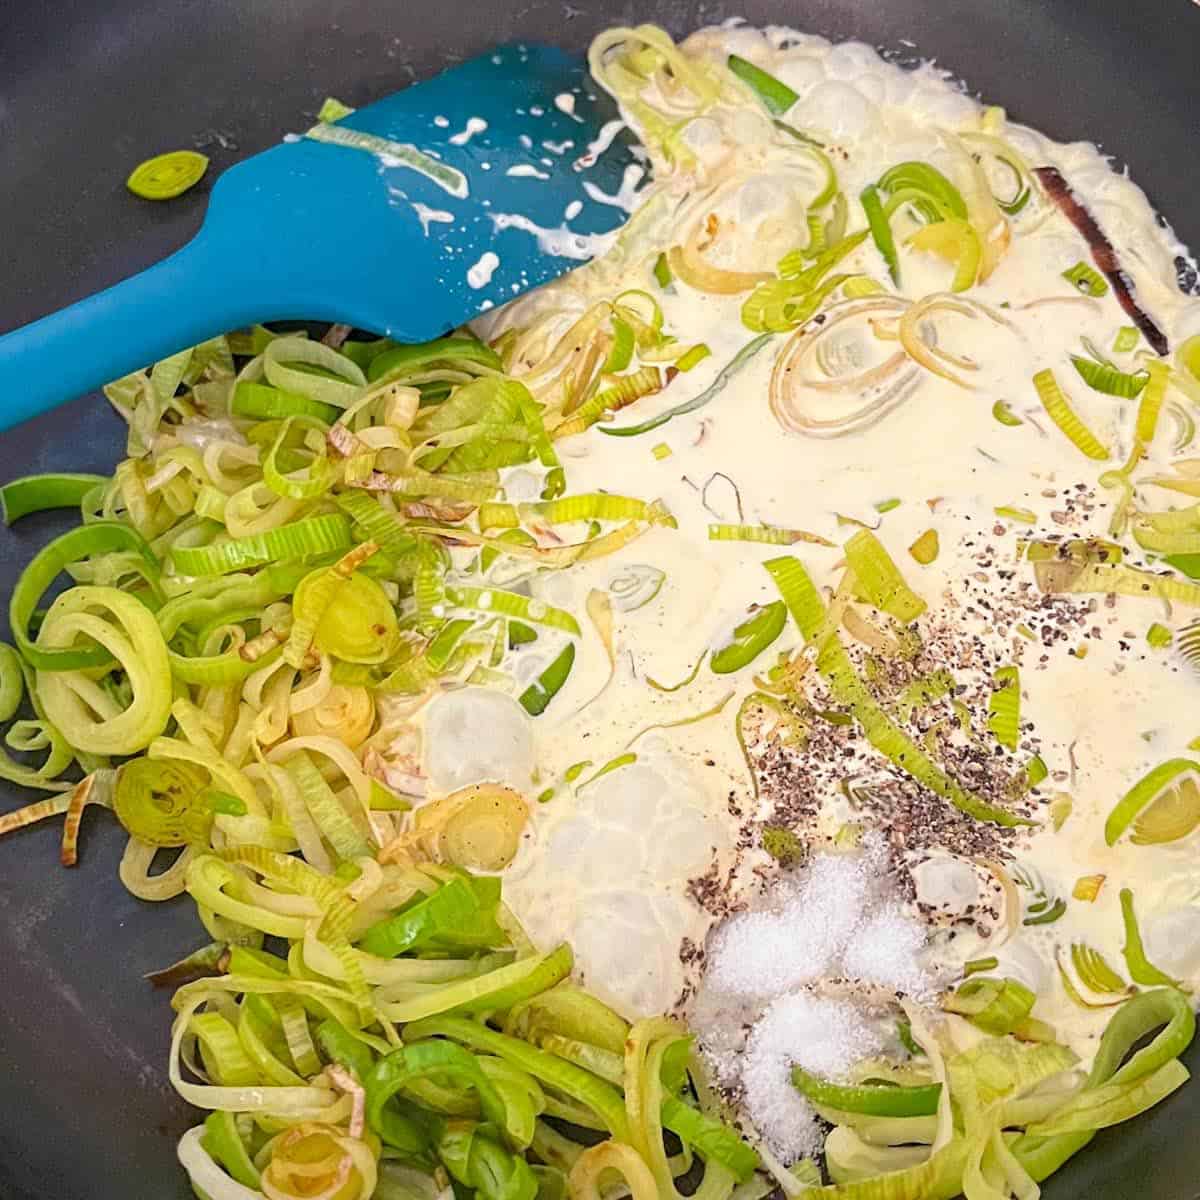 Add cream to fried leeks in a frying pan.